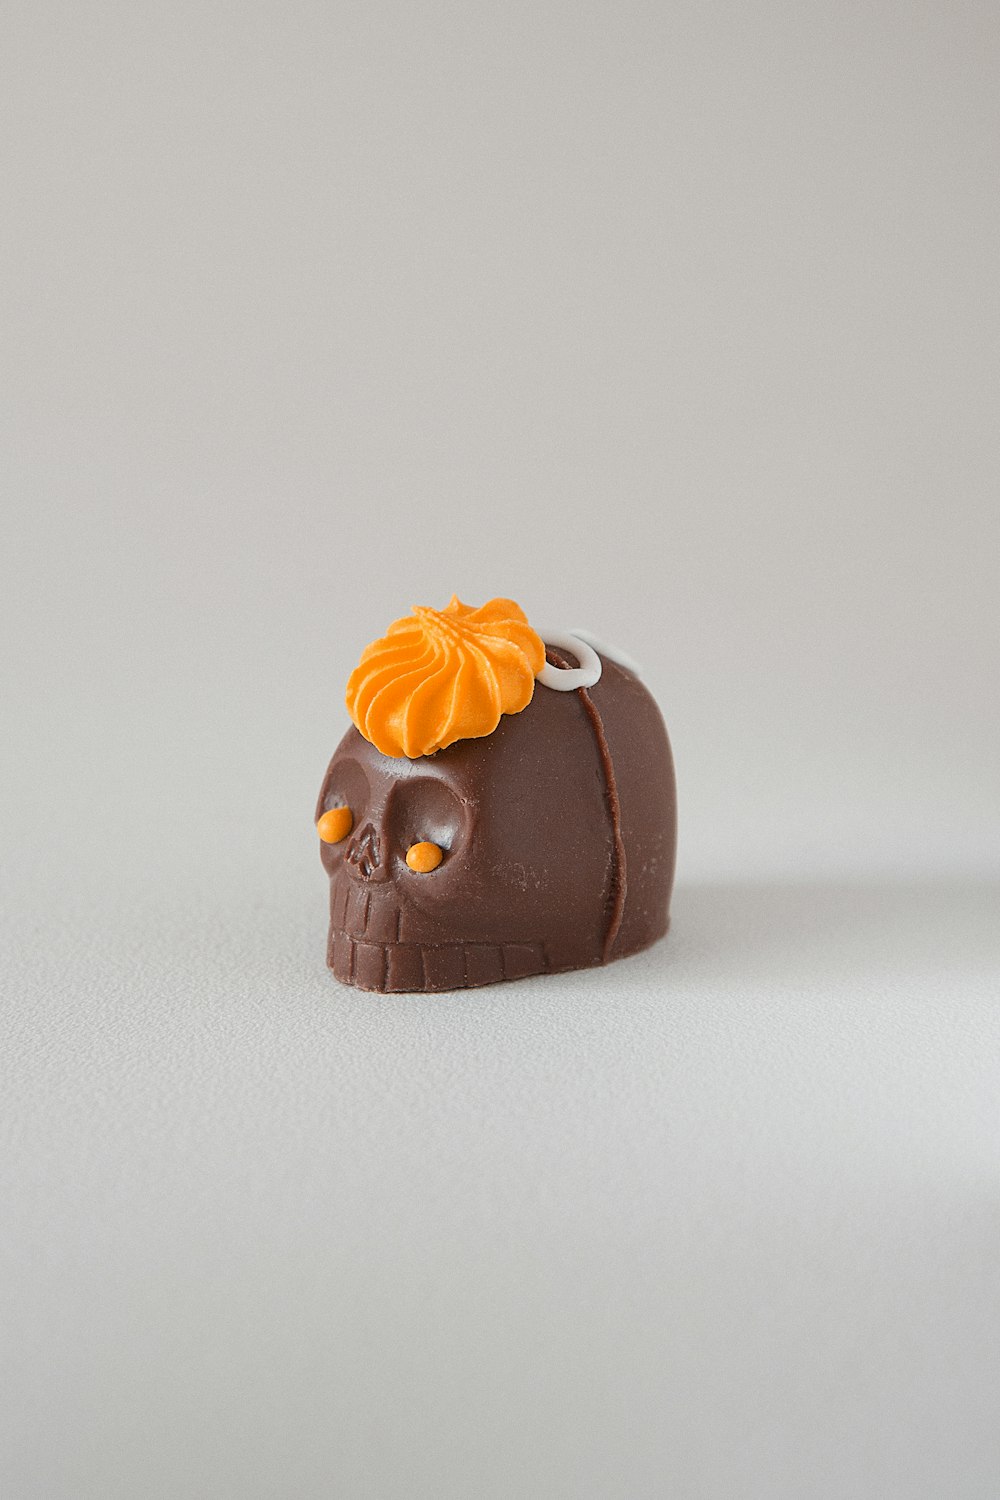 a chocolate skull with an orange flower on its head